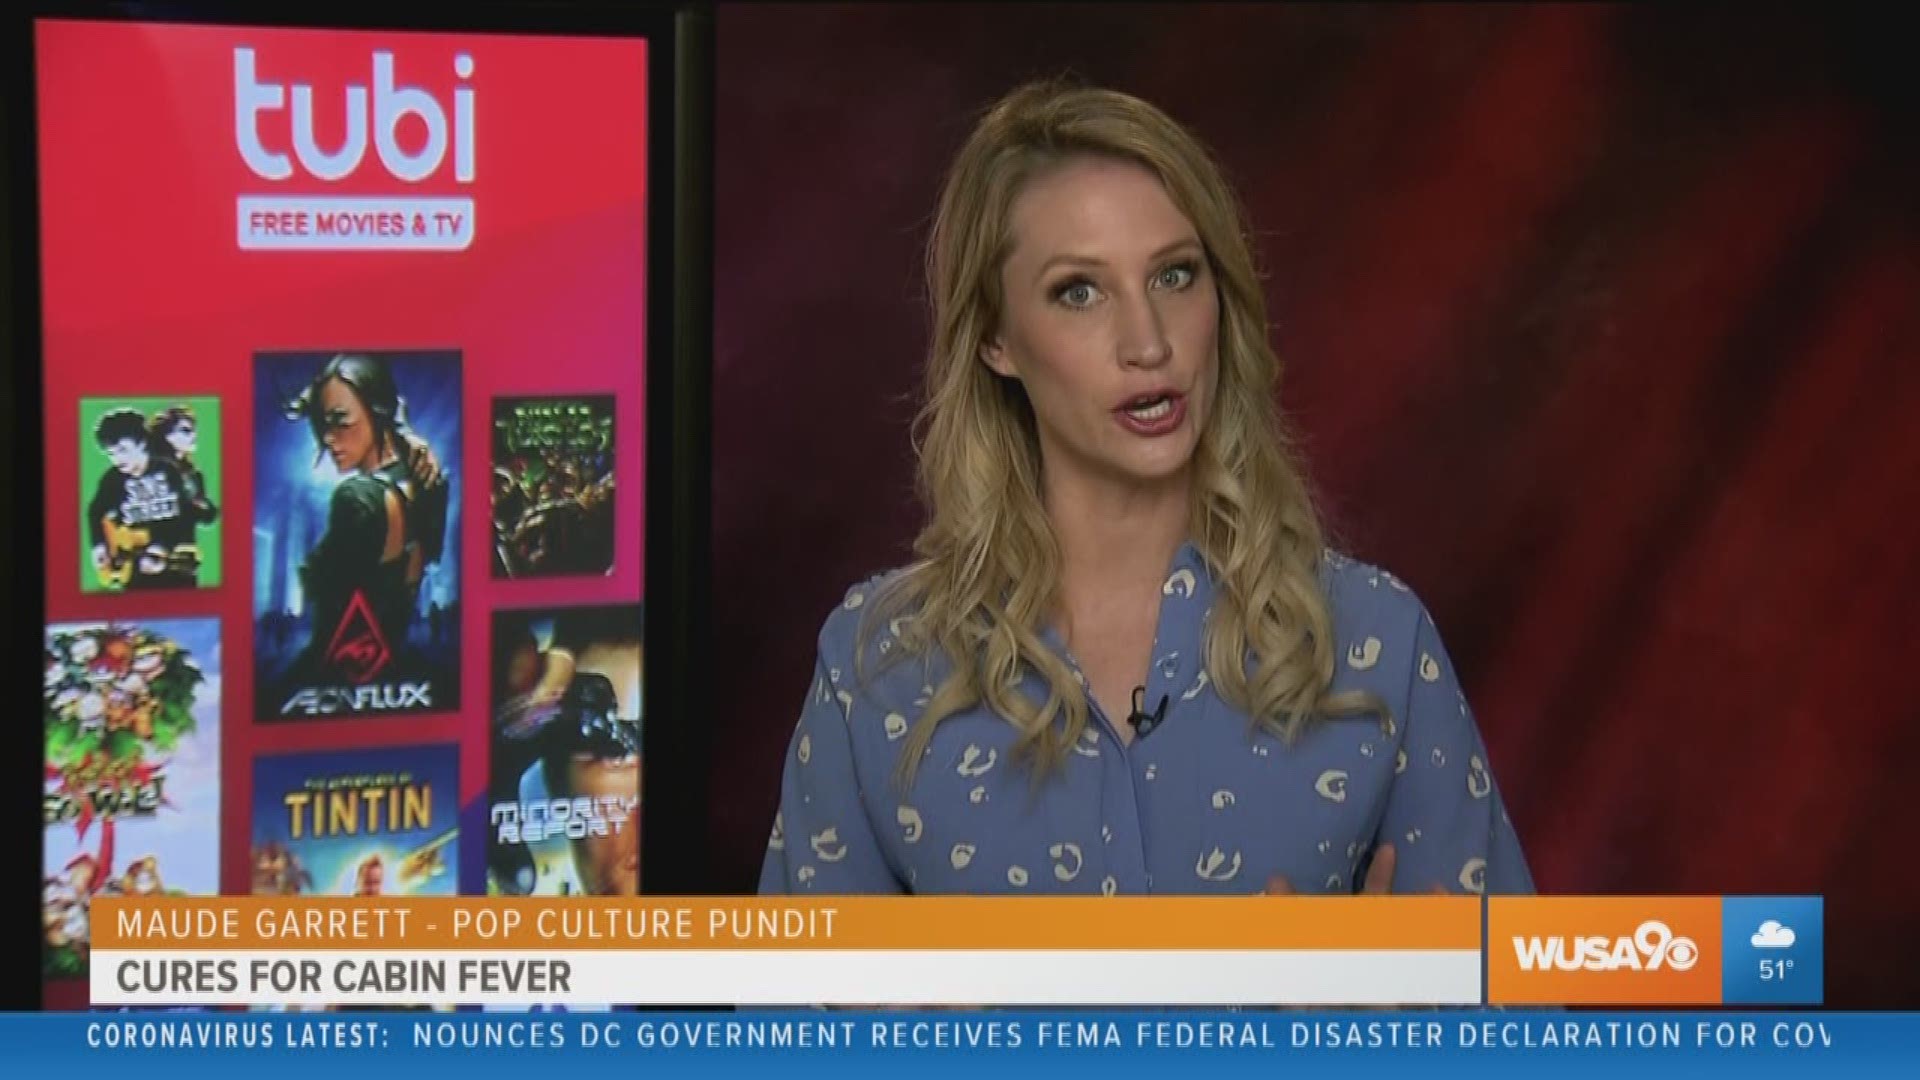 Pop culture pundit, Maude Garrett shares the top movies to stream, that the whole family can enjoy.